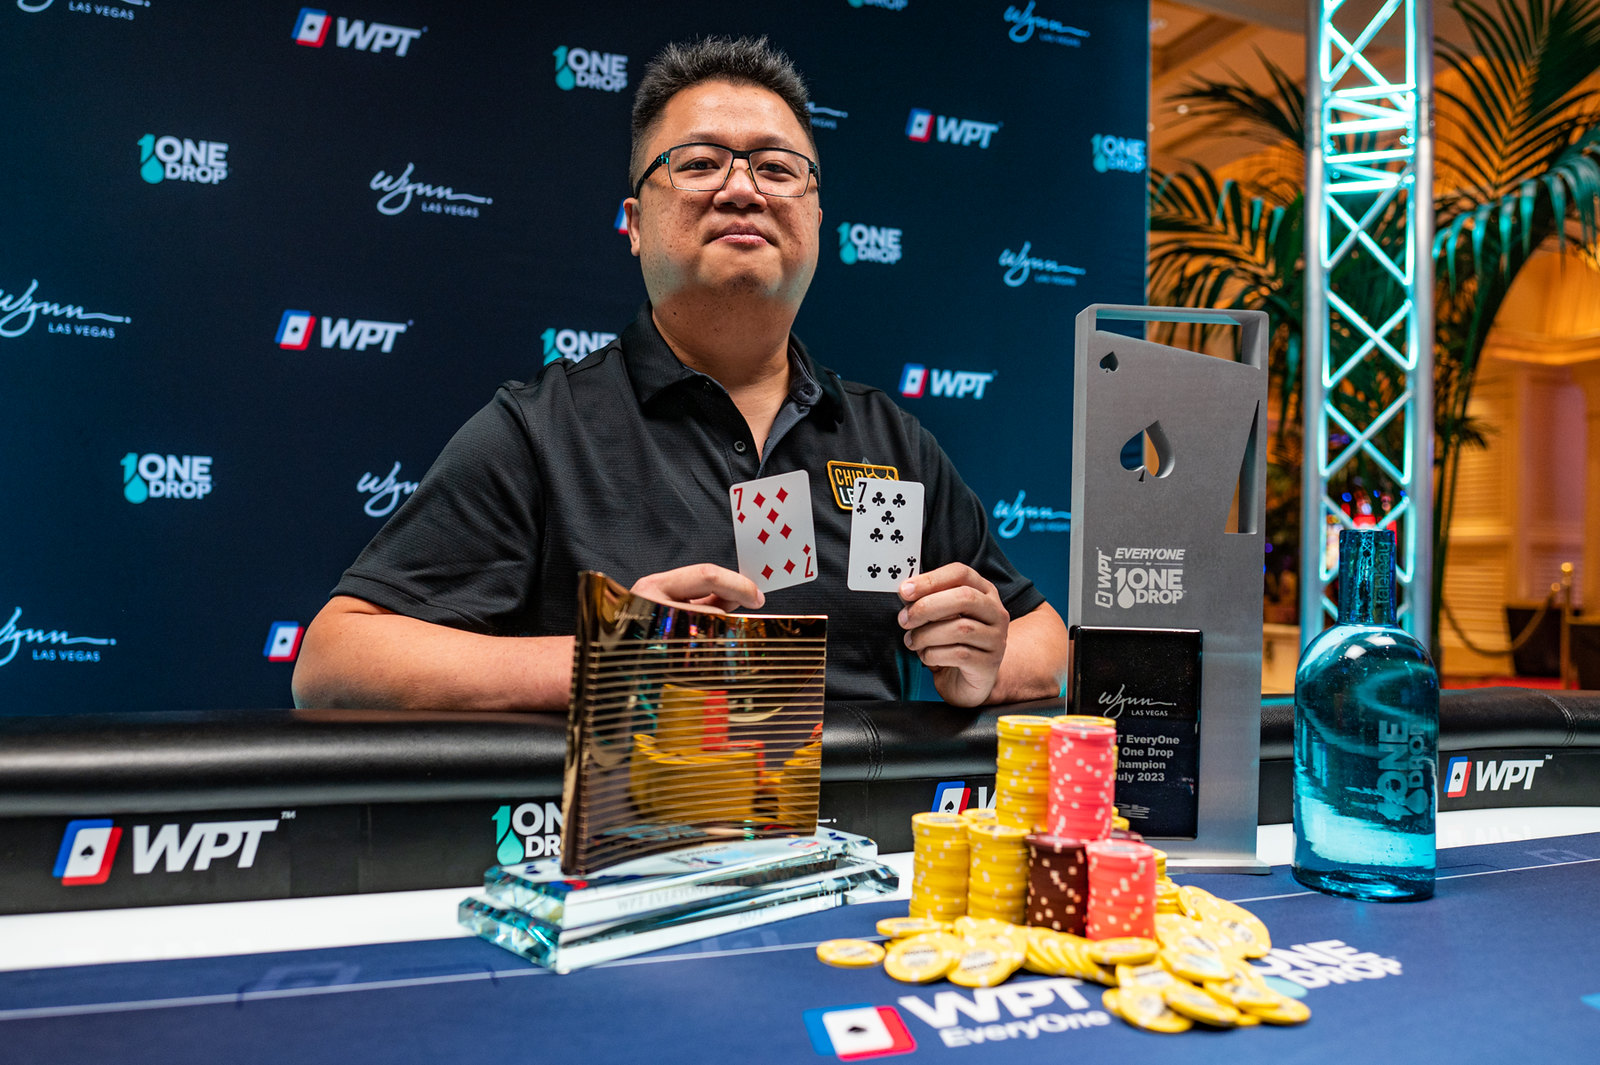 Bin Weng Wins the WPT Everyone for One Drop